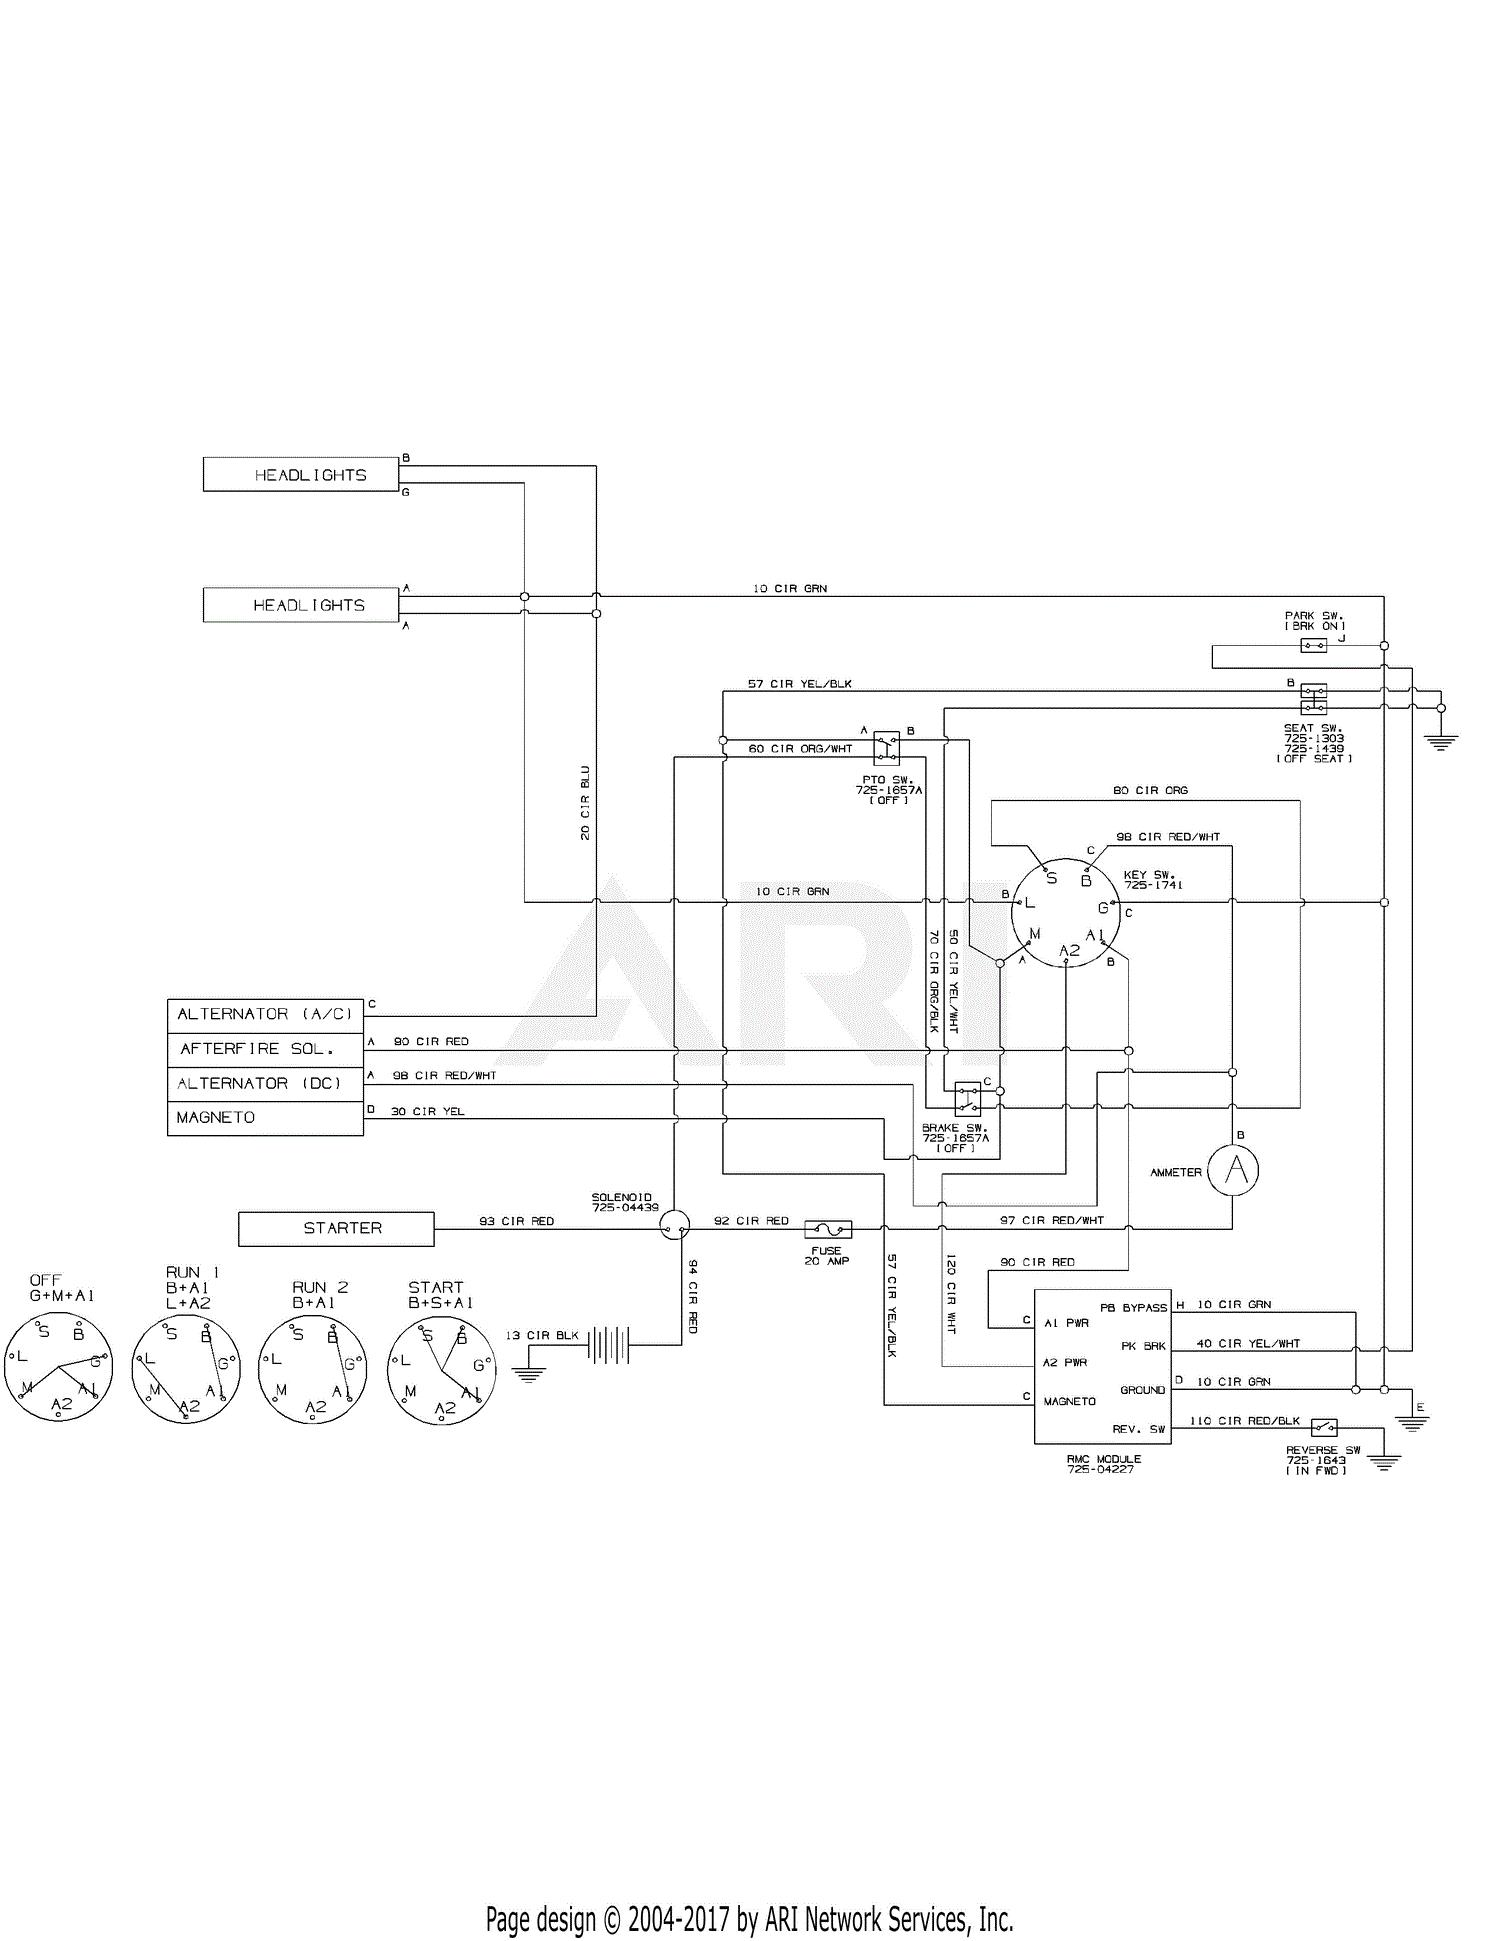 Wiring Diagram For Mtd Riding Lawn Mower from schematron.org